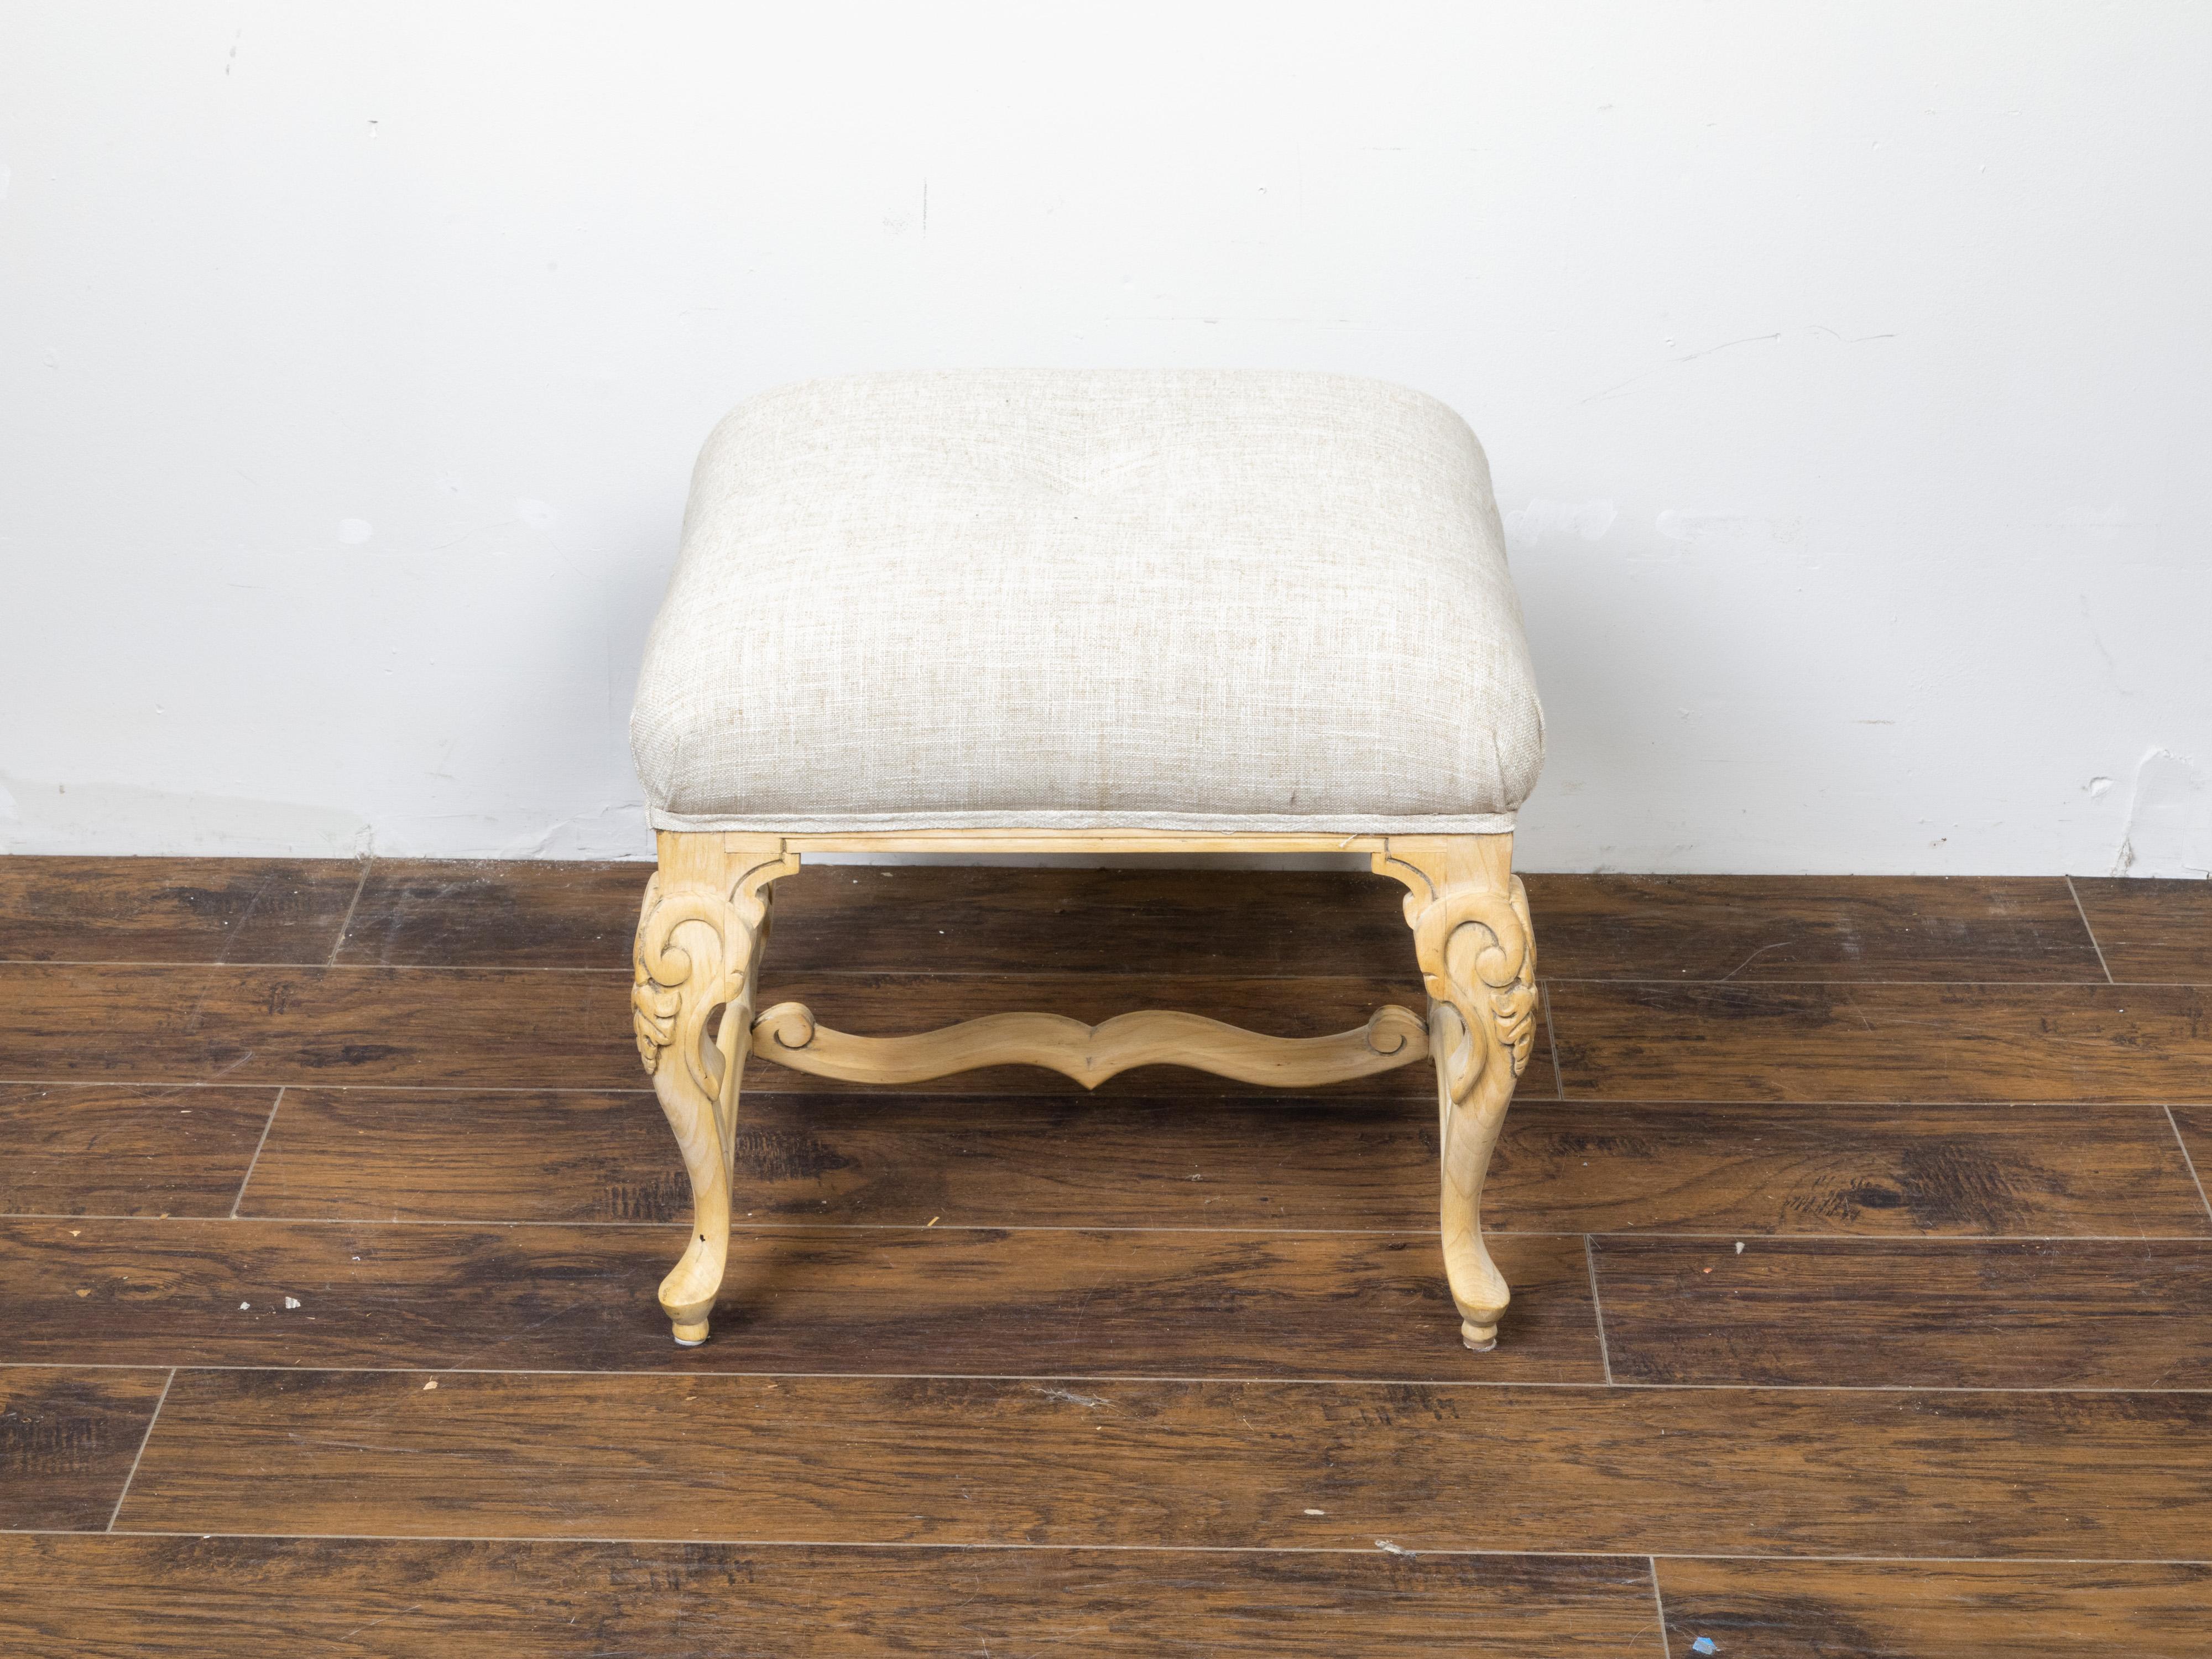 A French vintage bleached wooden stool from the mid 20th century, with carved legs and new upholstery. Created in France during the midcentury period, this bleached wood stool features a square seat newly reupholstered with a neutral toned linen